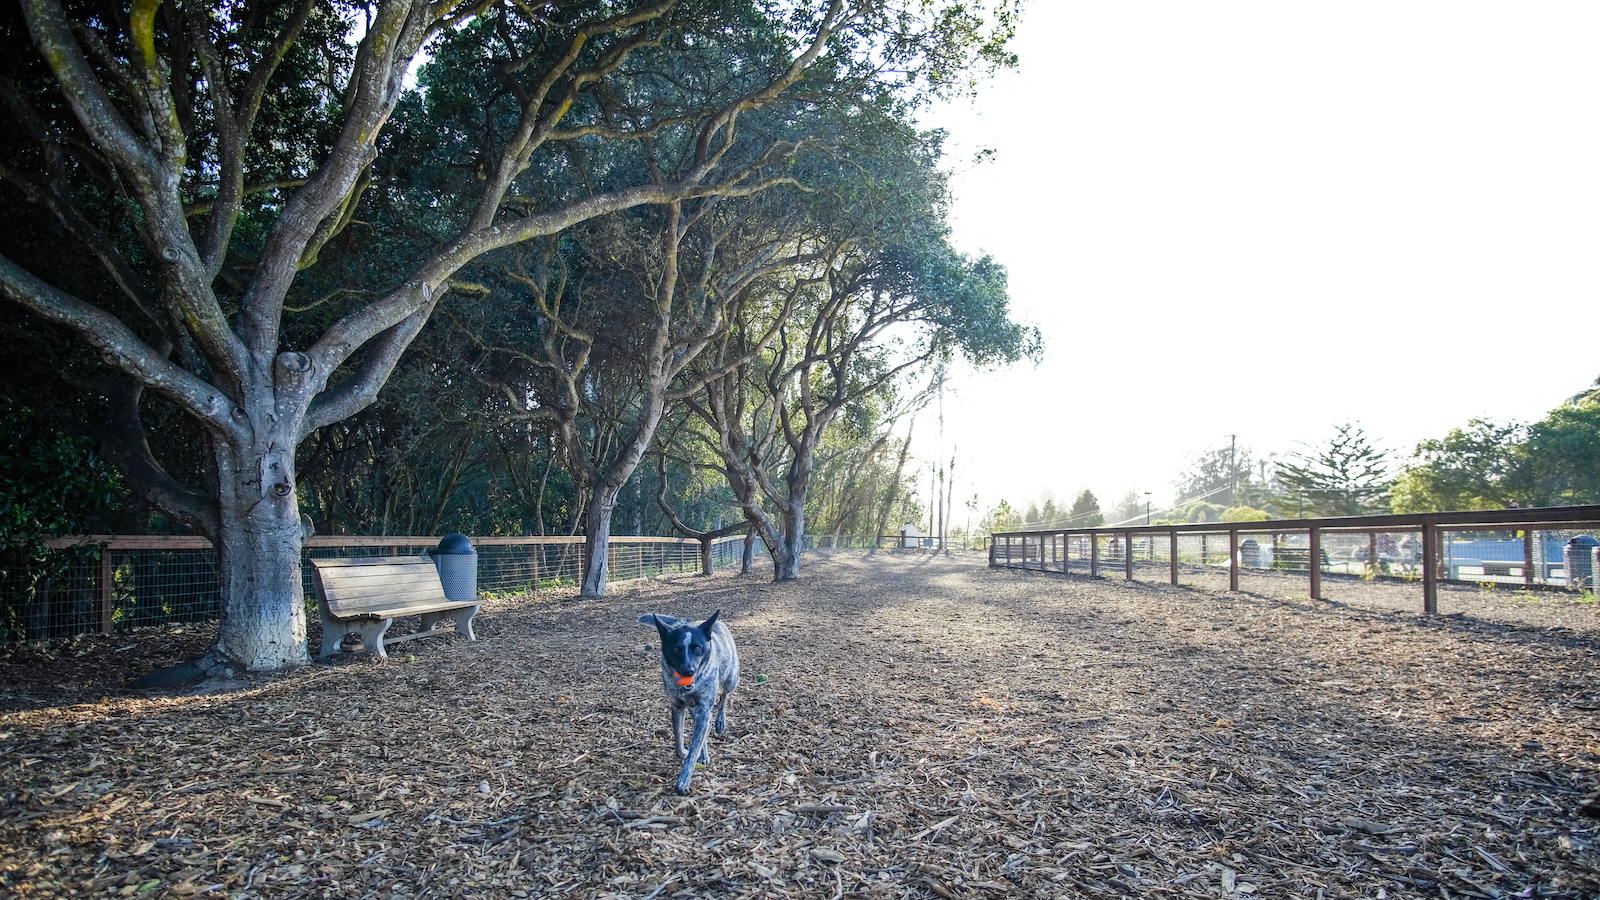 A beautiful blue heeler dog runs towards the camera with a bright orange ball in her mouth. In the background a large oak tree accompanies a bench at an enclosed dog park with a wood chip ground.